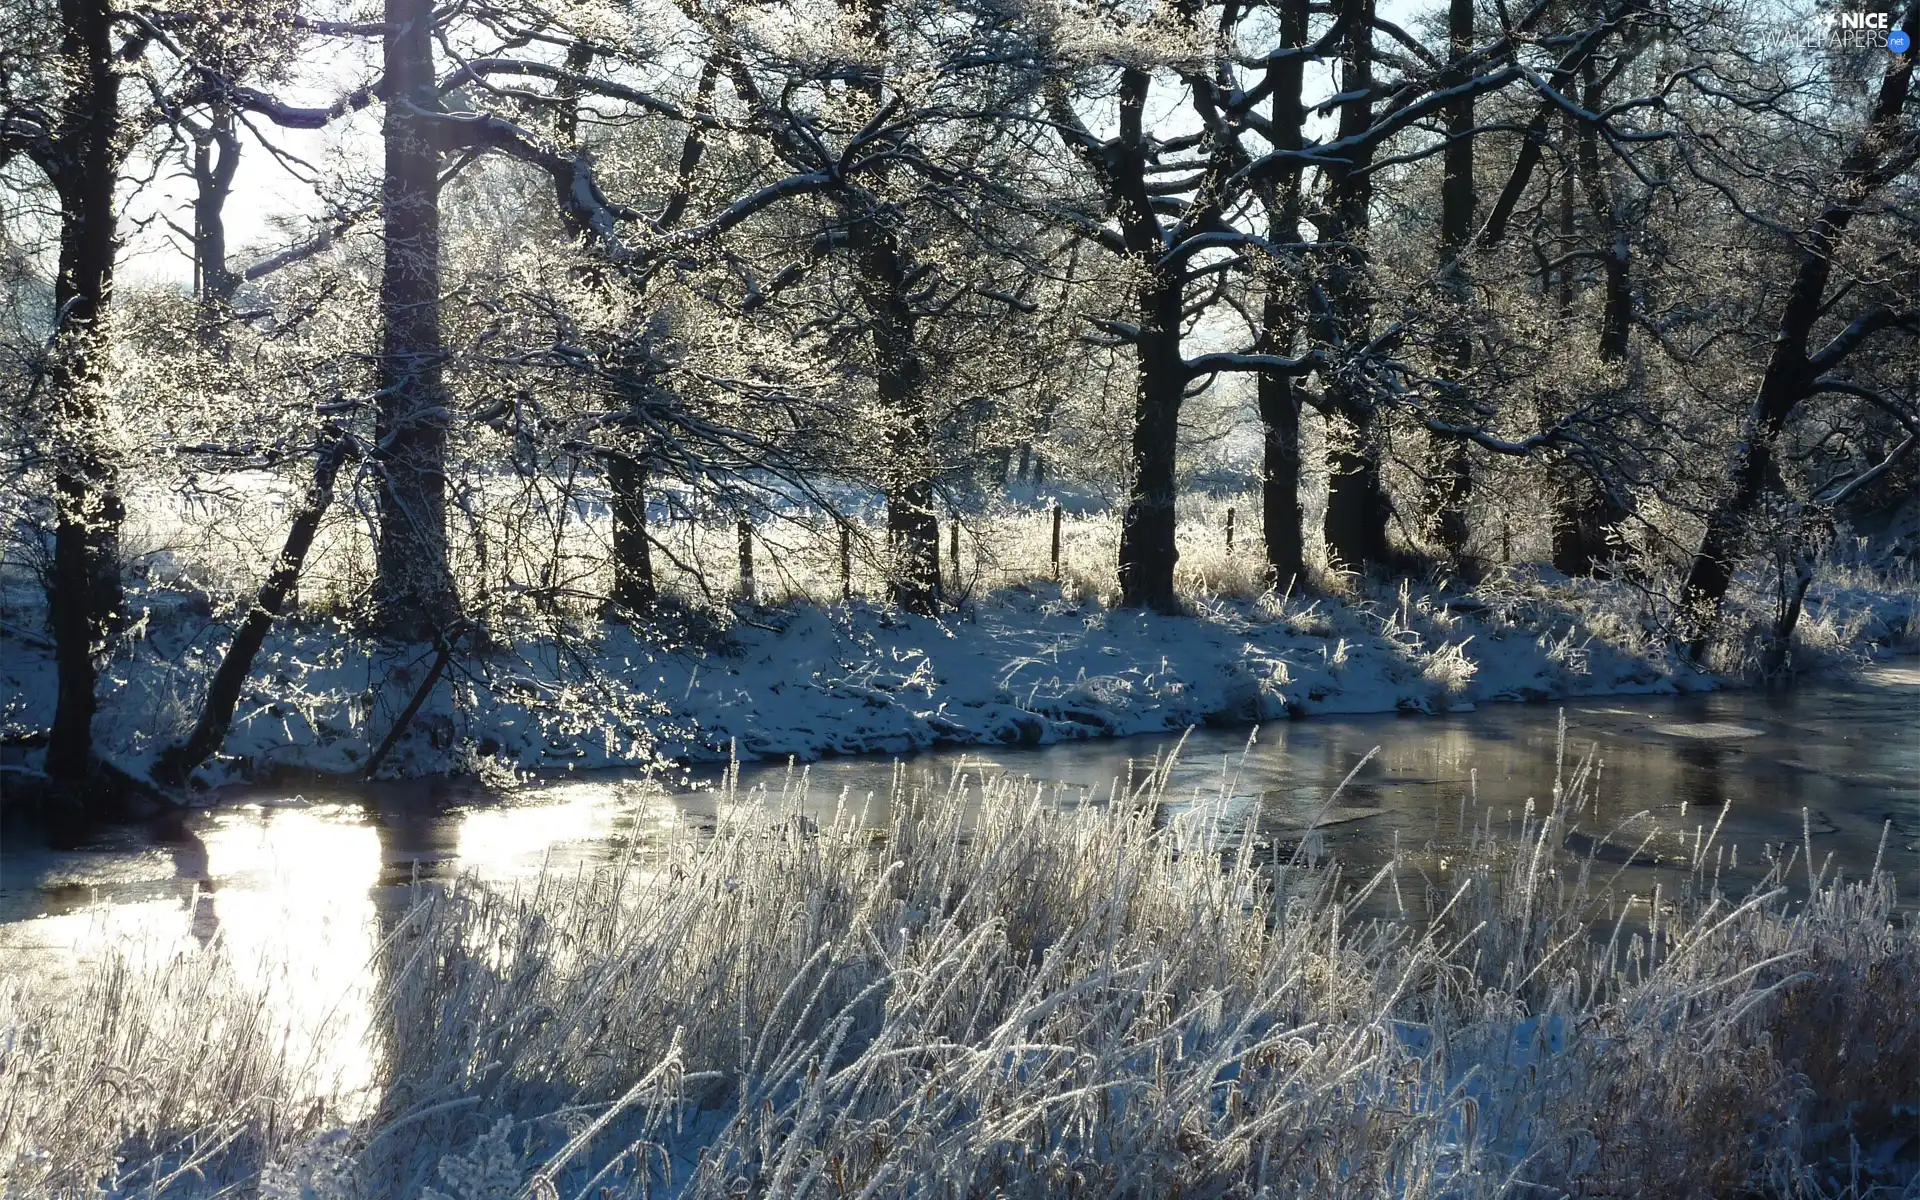 grass, winter, trees, viewes, River